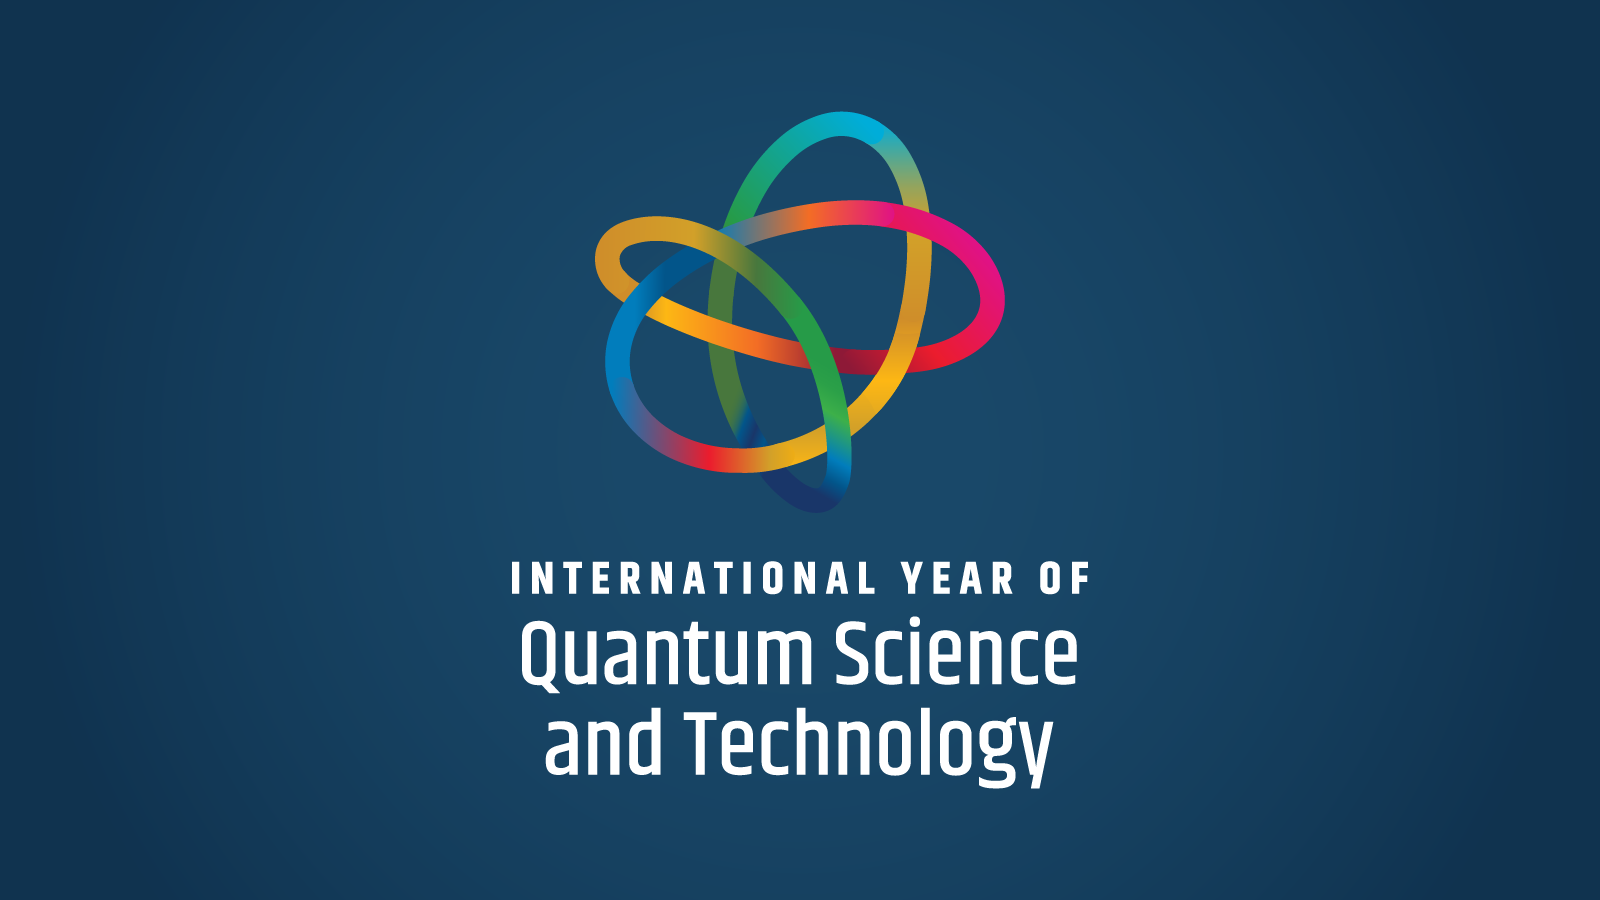 INL partners with the International Year of Quantum Science and Technology 2025 (IYQ), endorsed by the United Nations